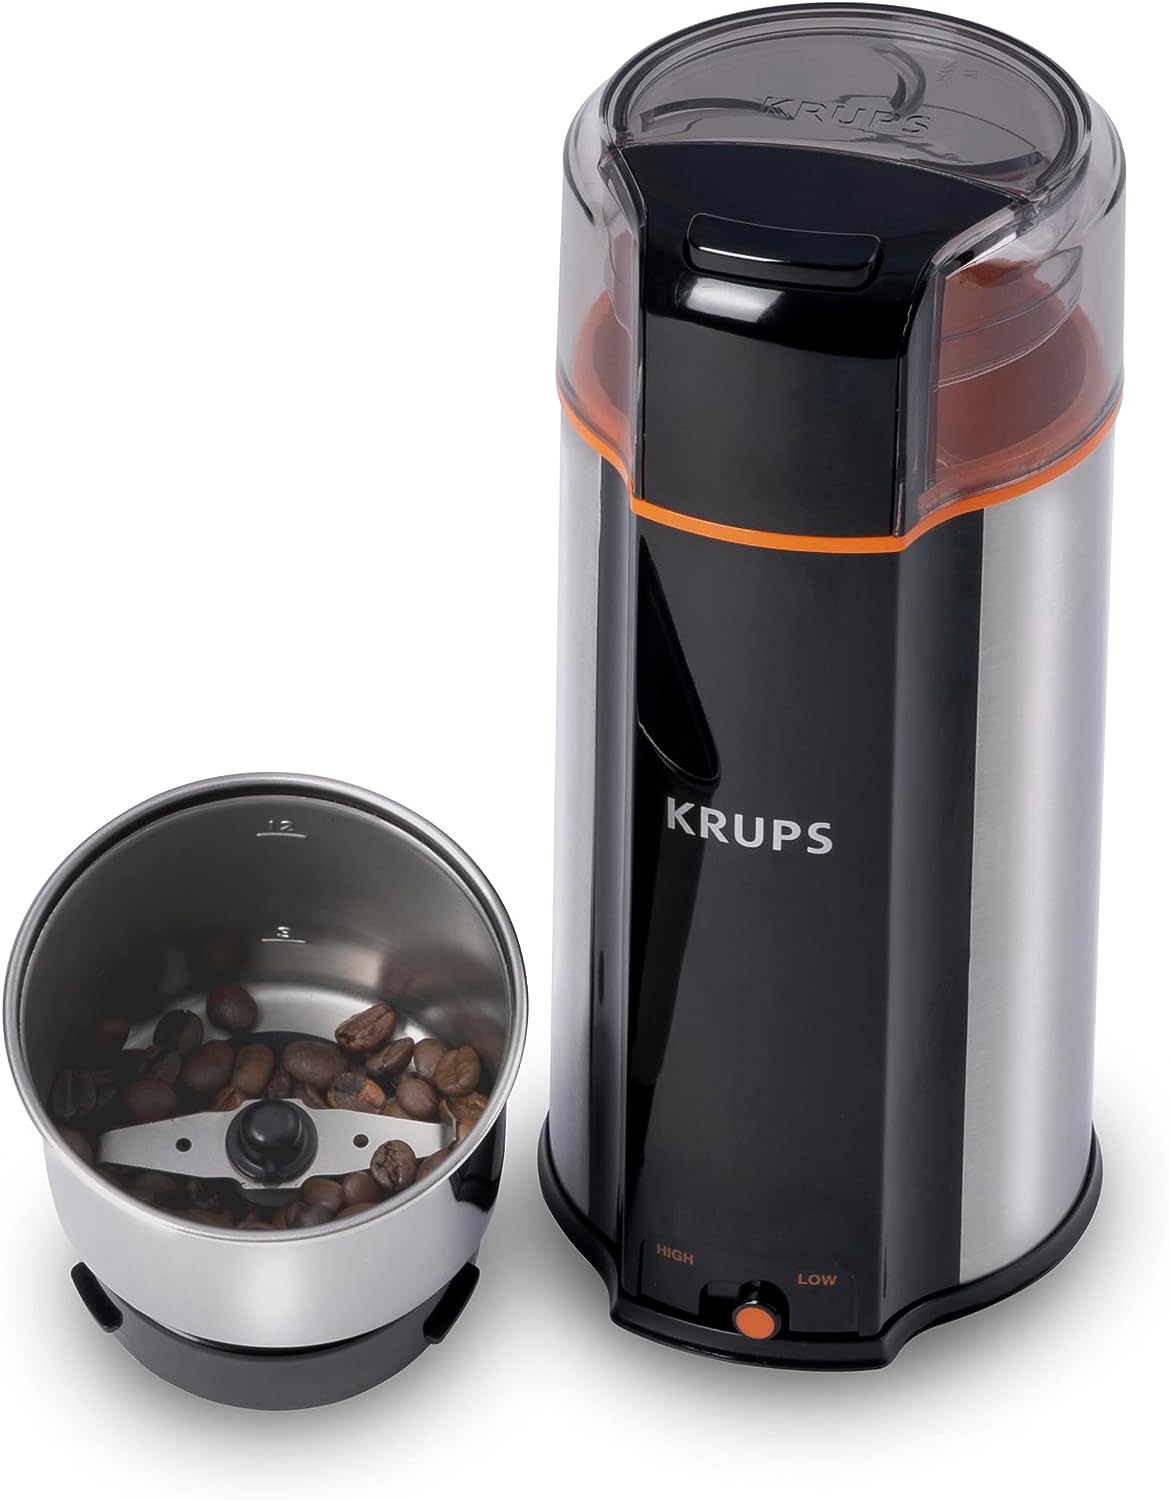 https://bigbigmart.com/wp-content/uploads/2023/10/Krups-Ultimate-Silent-Vortex-Stainless-Steel-Coffee-and-Spice-Grinder-with-Removable-Bowl-14-Cup-Easy-to-Use-8-Times-Quieter-2-Speeds-240-Watts-Coffee-Spices-Dry-Herbs-Dishwasher-Safe-Silver.jpg